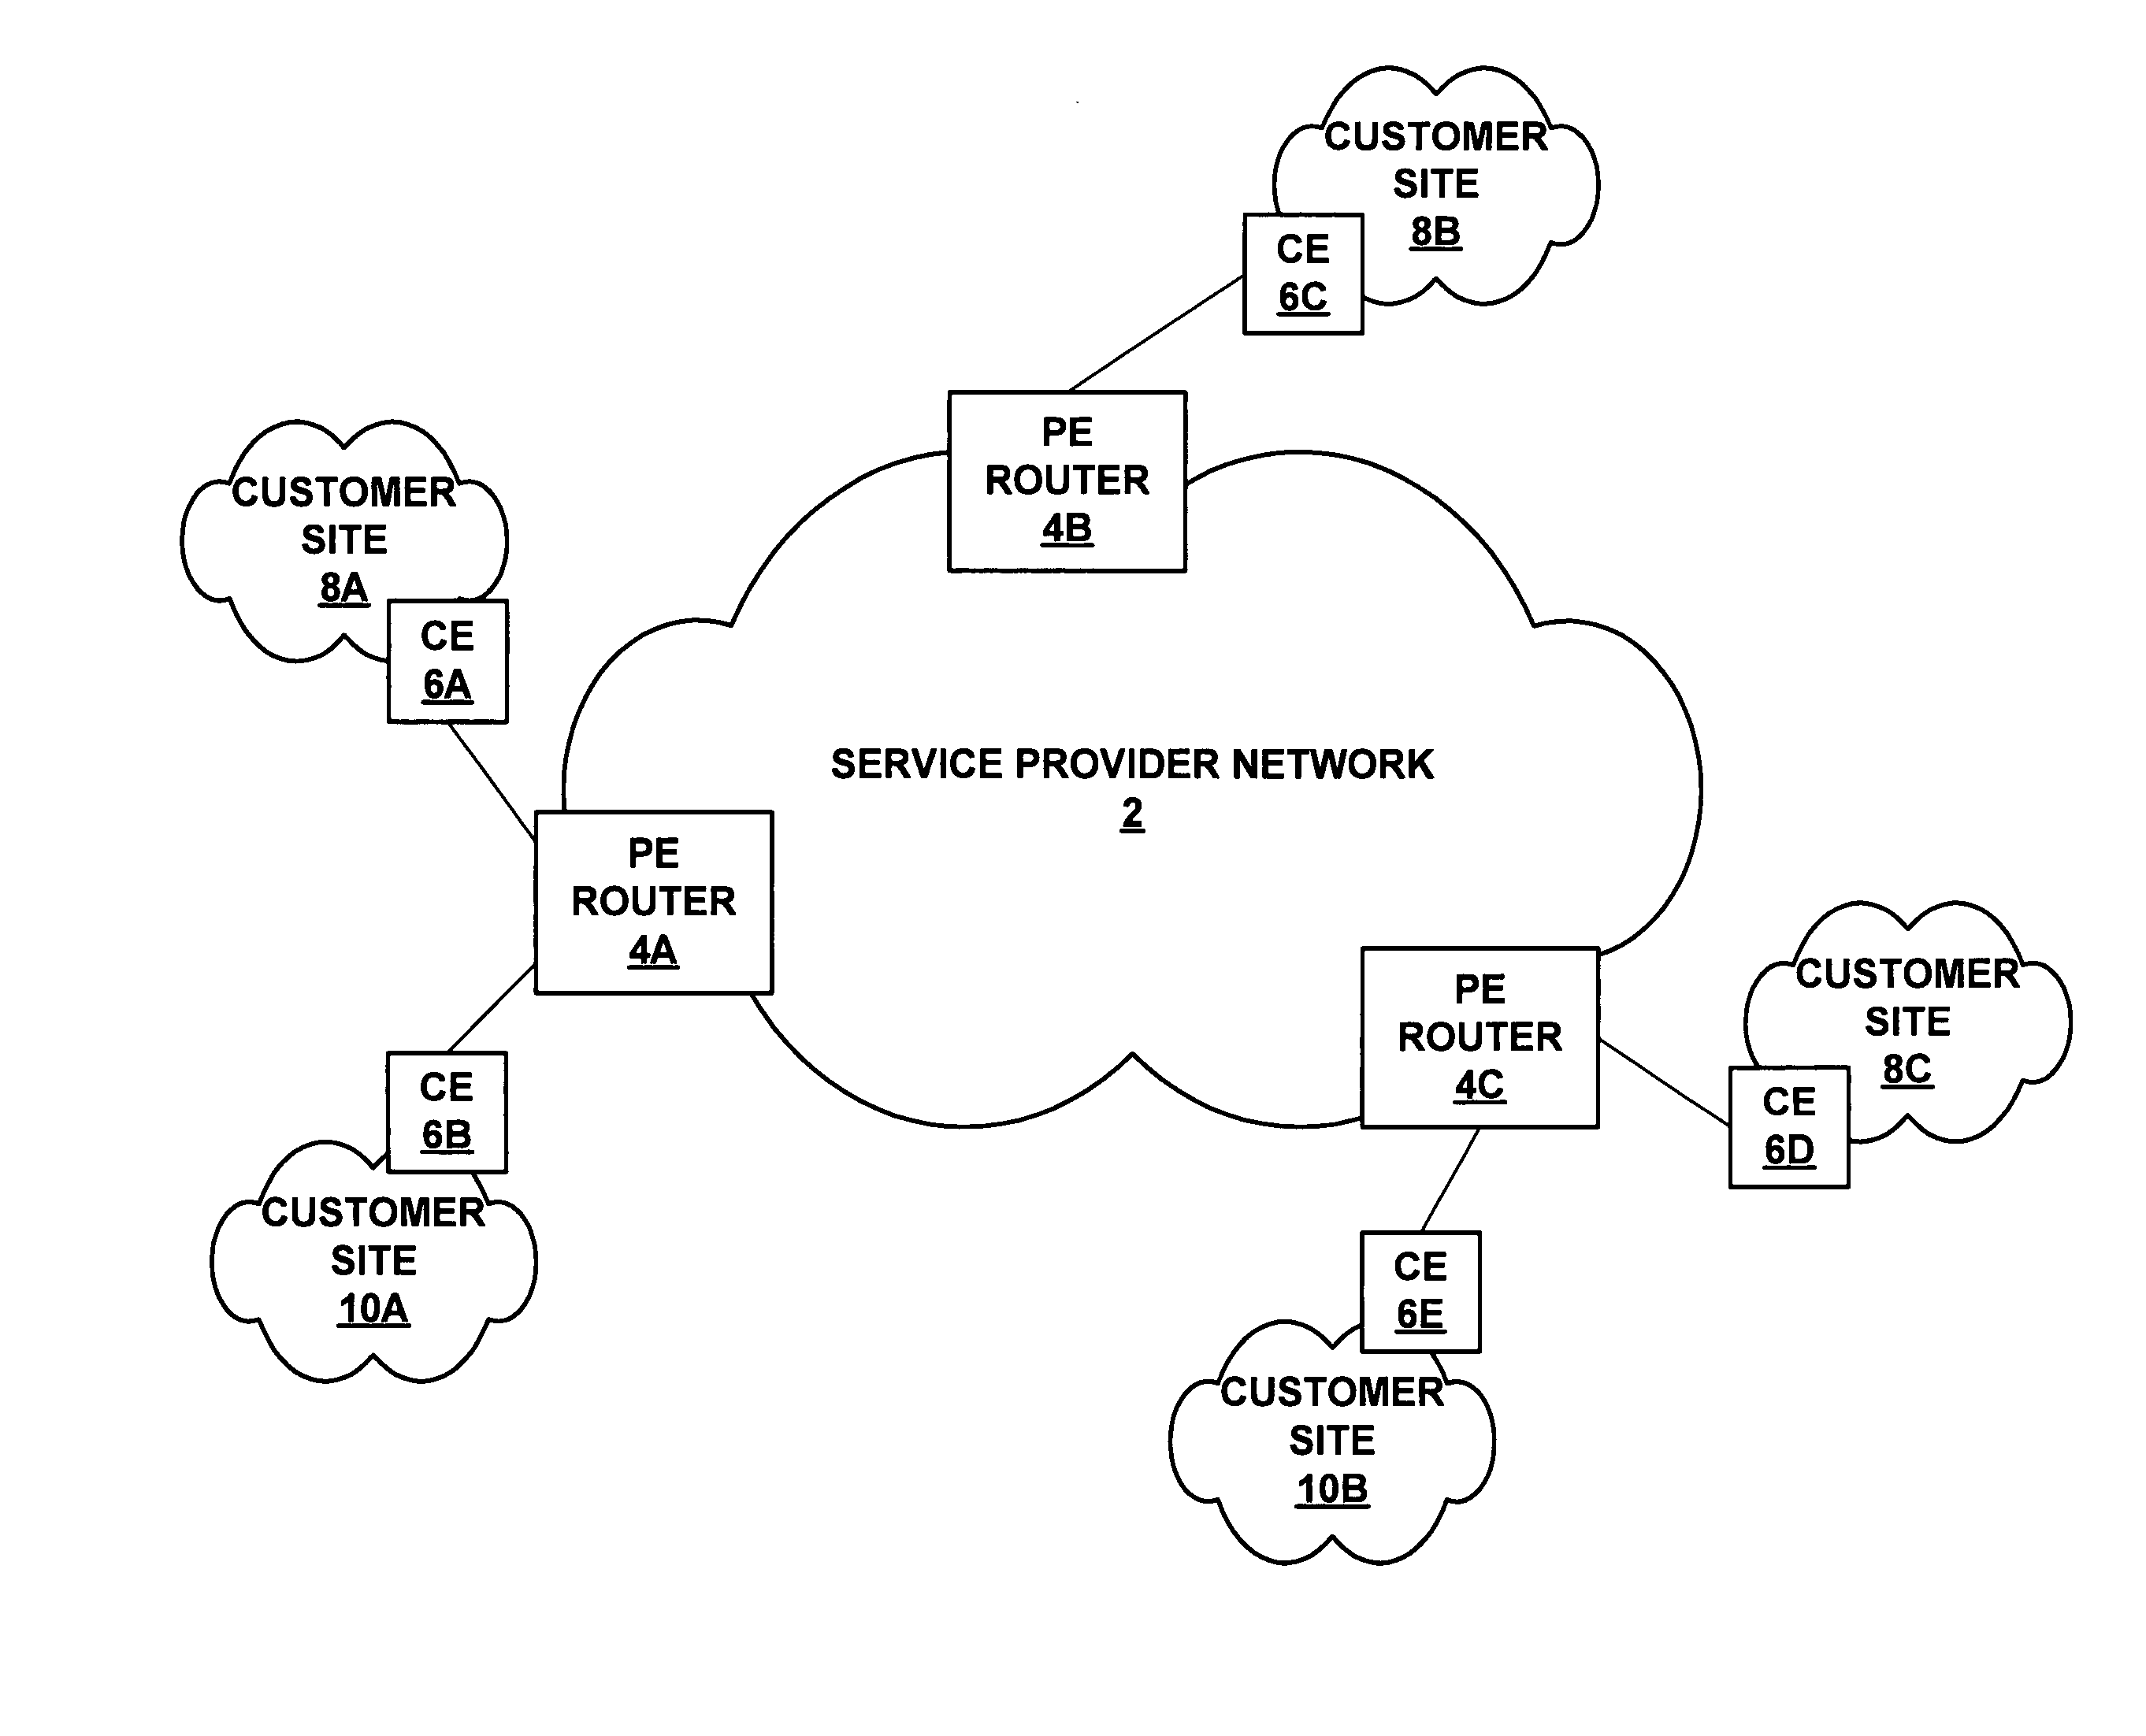 Automatic selection of site-IDs for virtual private networks